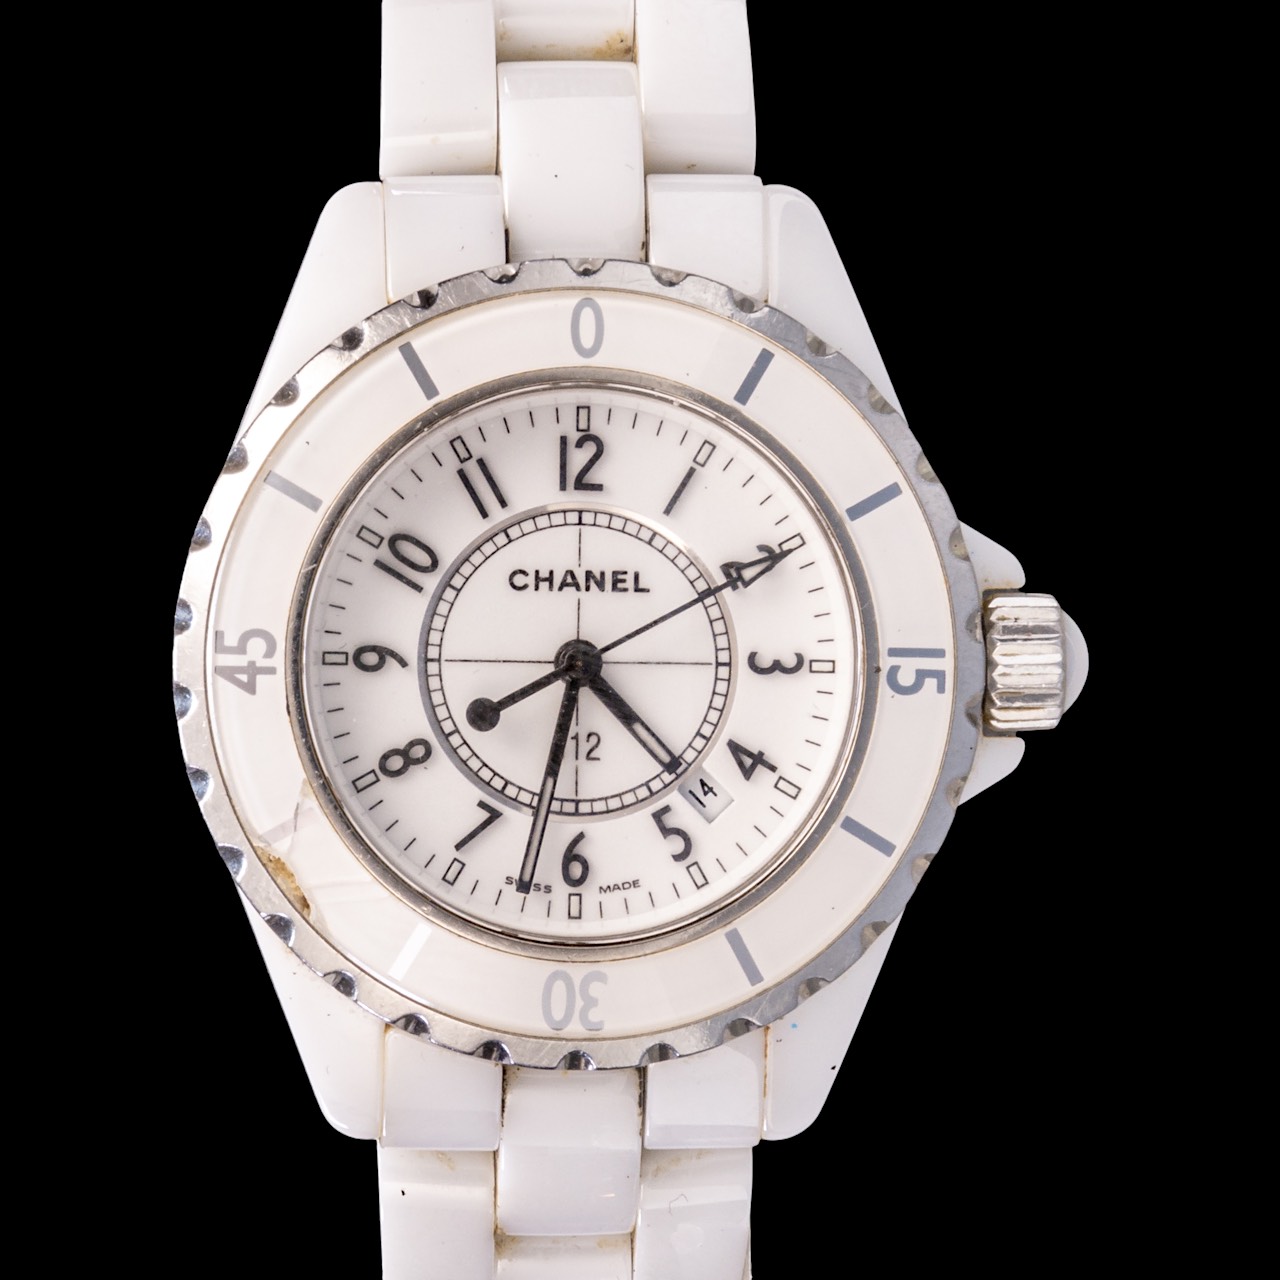 Chanel J12 Watch, white ceramic and steel, 33 mm, Ref. H5698 - Image 2 of 12